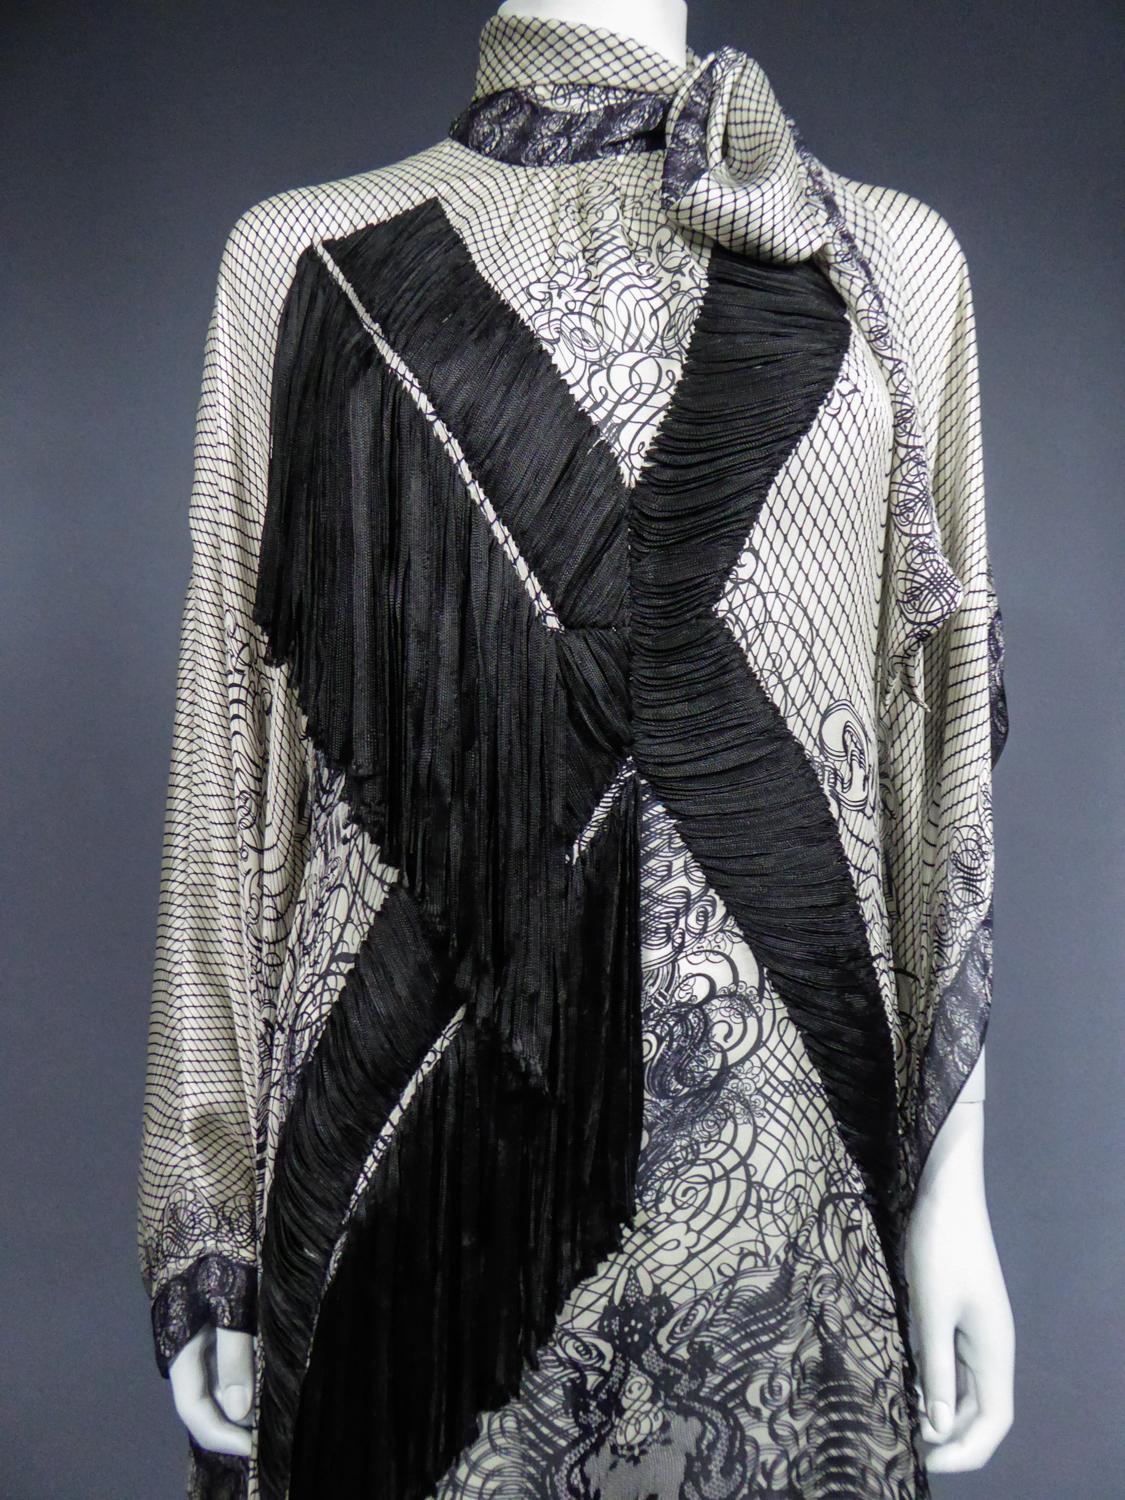 A Jean-Paul Gaultier Tunic Dress in Printed Silk - Spring / Summer 2009 1